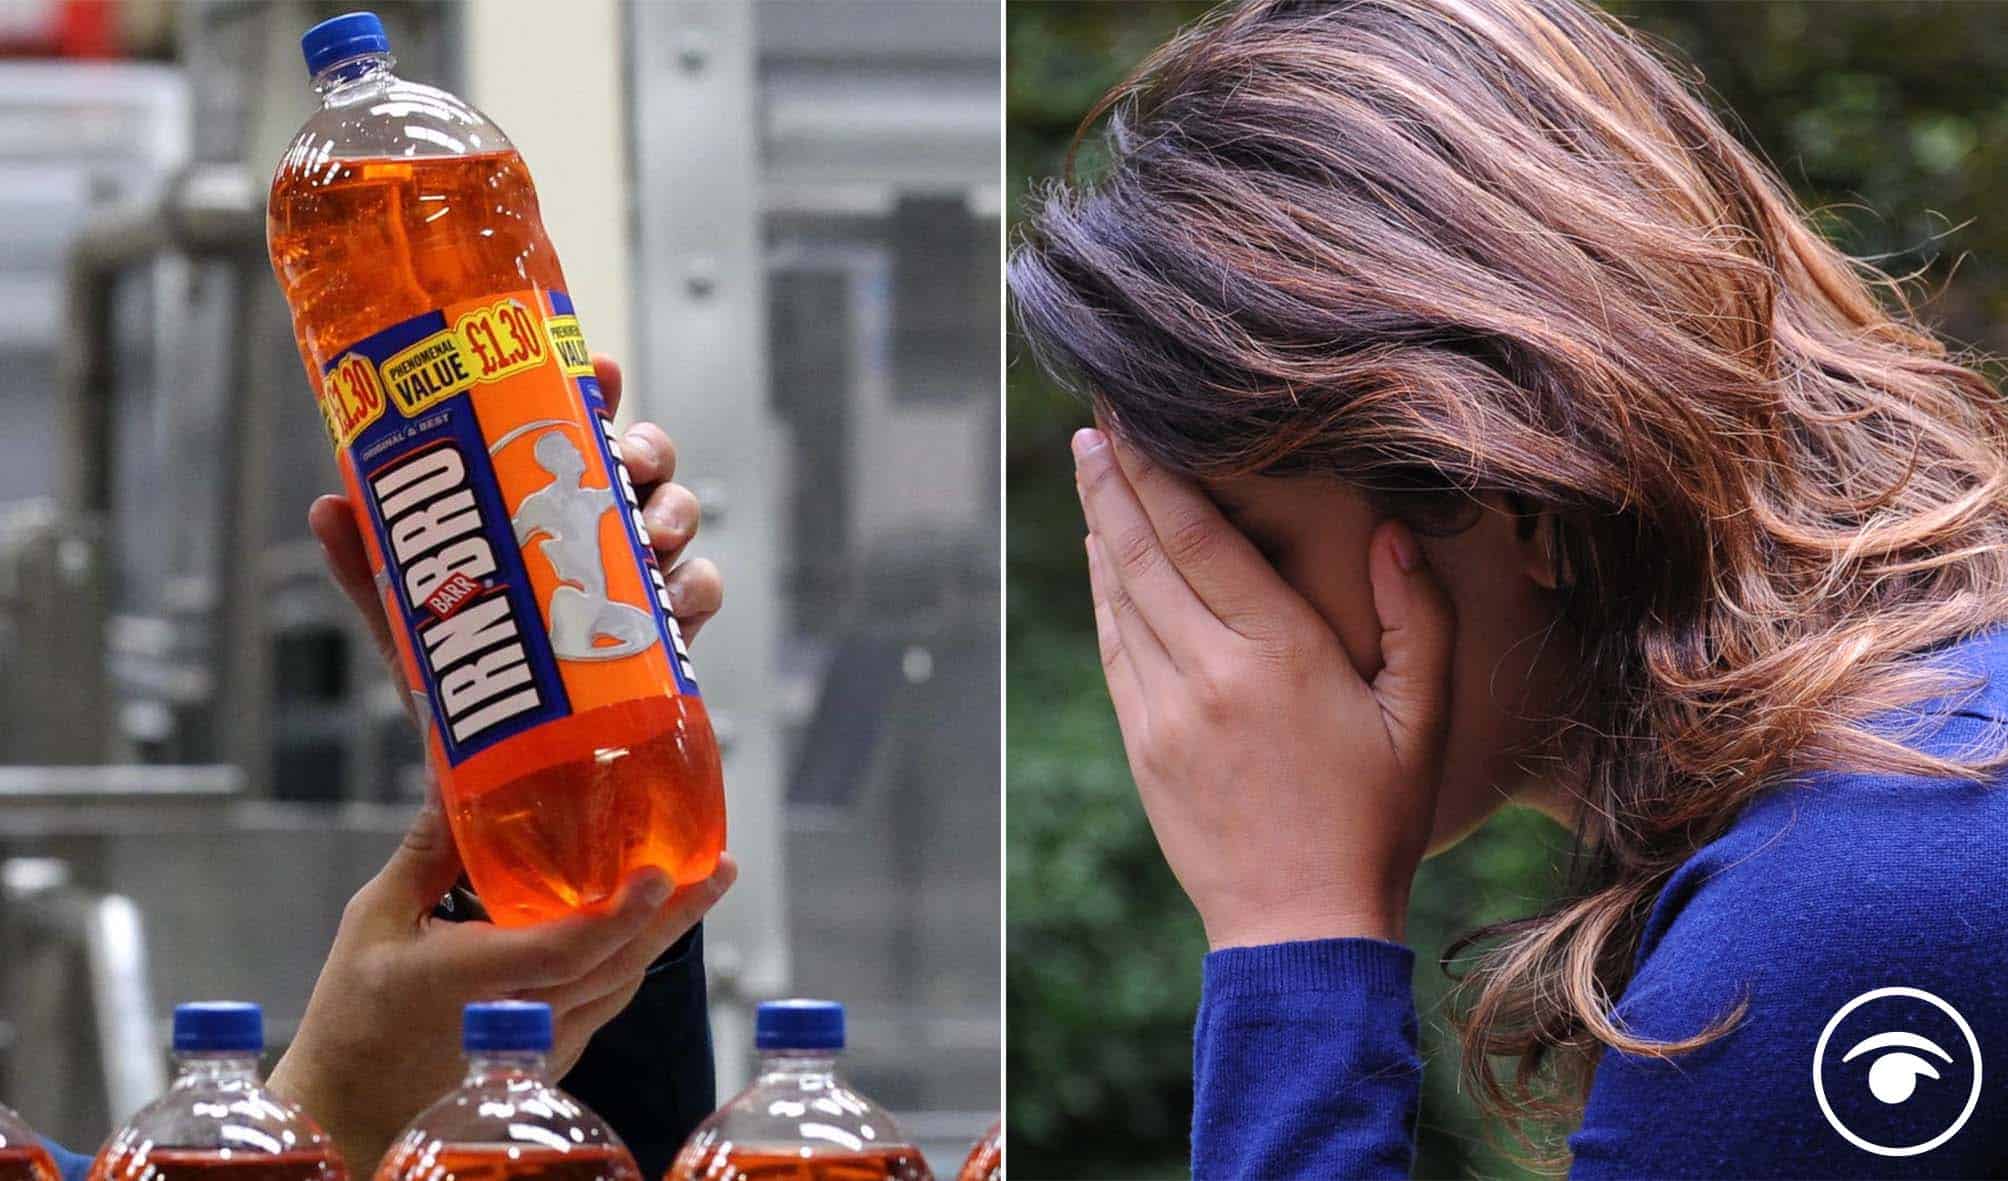 ‘York was sacked for less:’ Irn-Bru fans fizzing with anger after deliveries hit by driver shortage